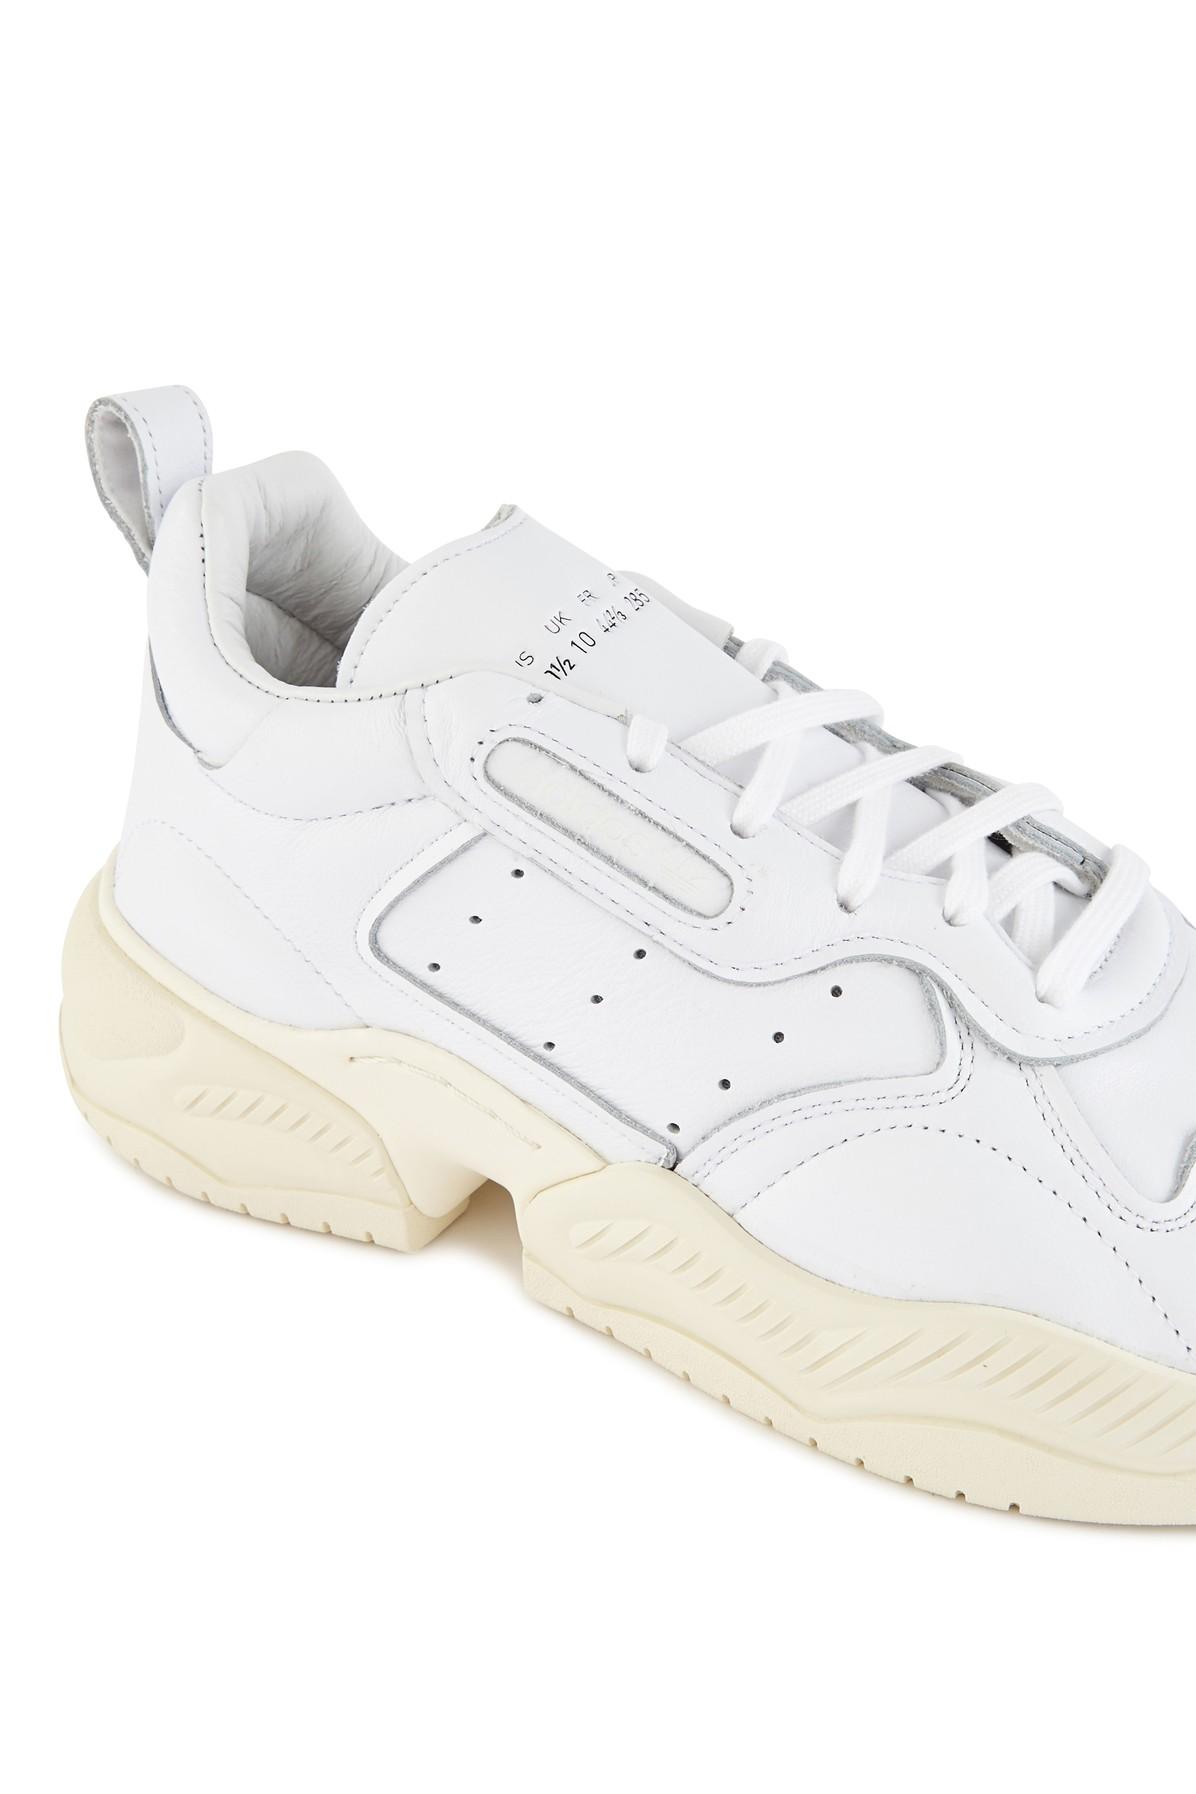 adidas Originals Supercourt Rx Raw White Leather Trainers for Men - Save  60% - Lyst